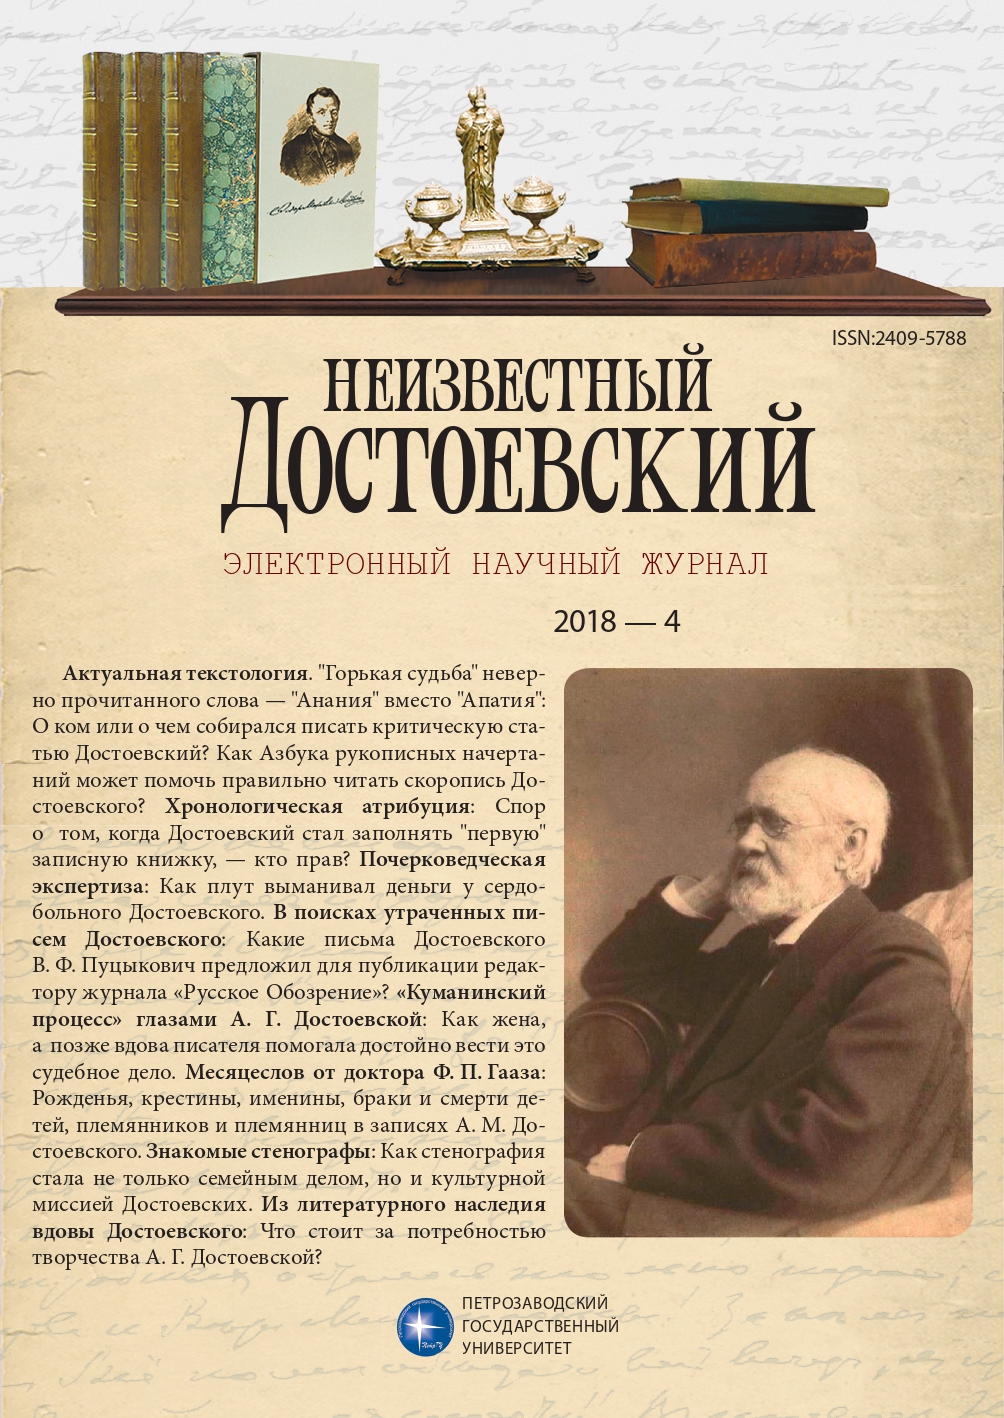 The “Unread” Literary Heritage of the Wife of Fedor Dostoevsky (with the Texts of Her Unpublished Works)